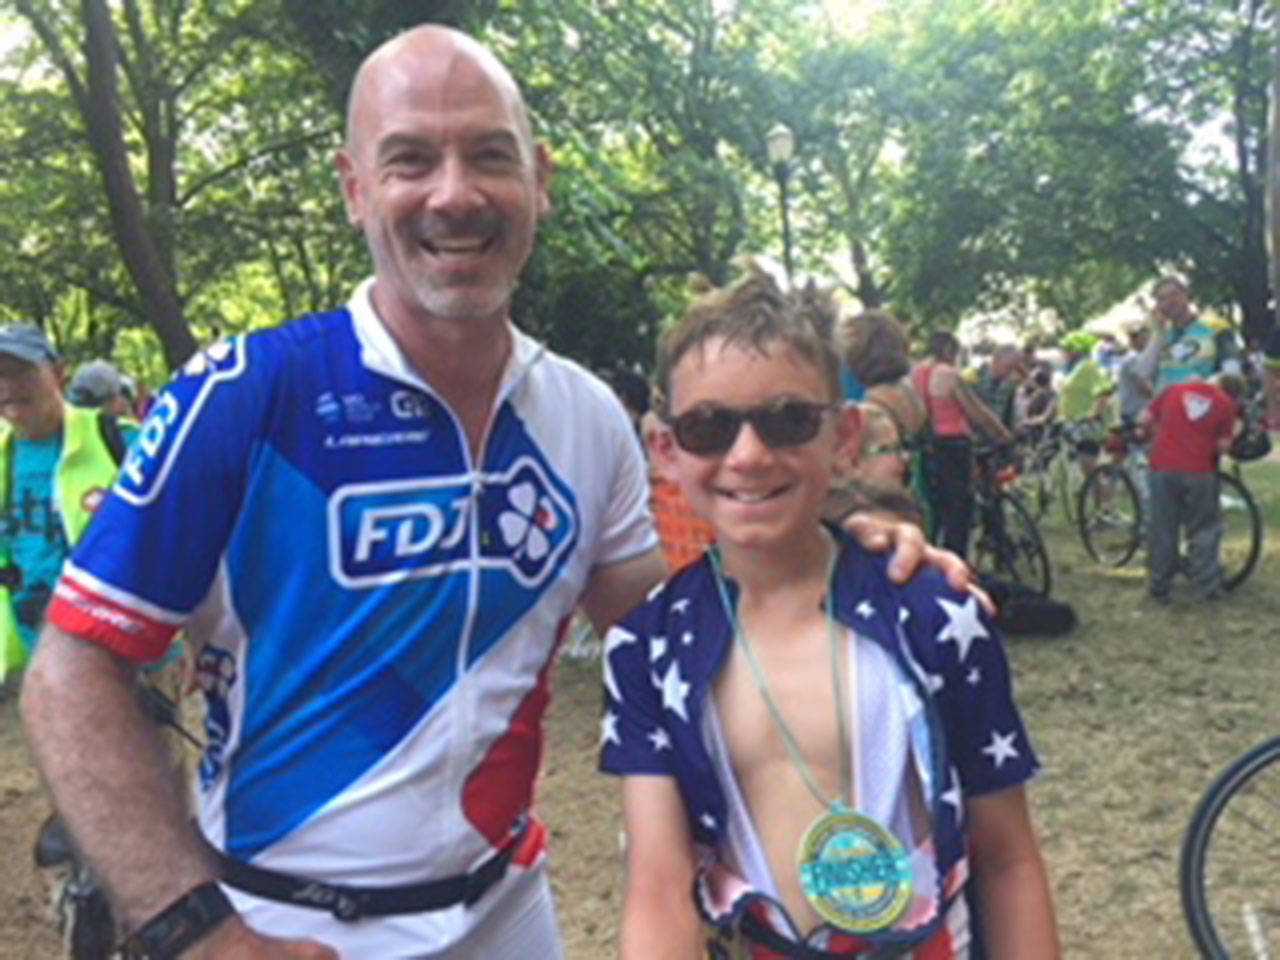 Photo courtesy of Jeffrey Roger | Jeffrey Roger and his son Julian, 10, stand together at the finish line of the 2018 Seattle to Portland bicycle ride.